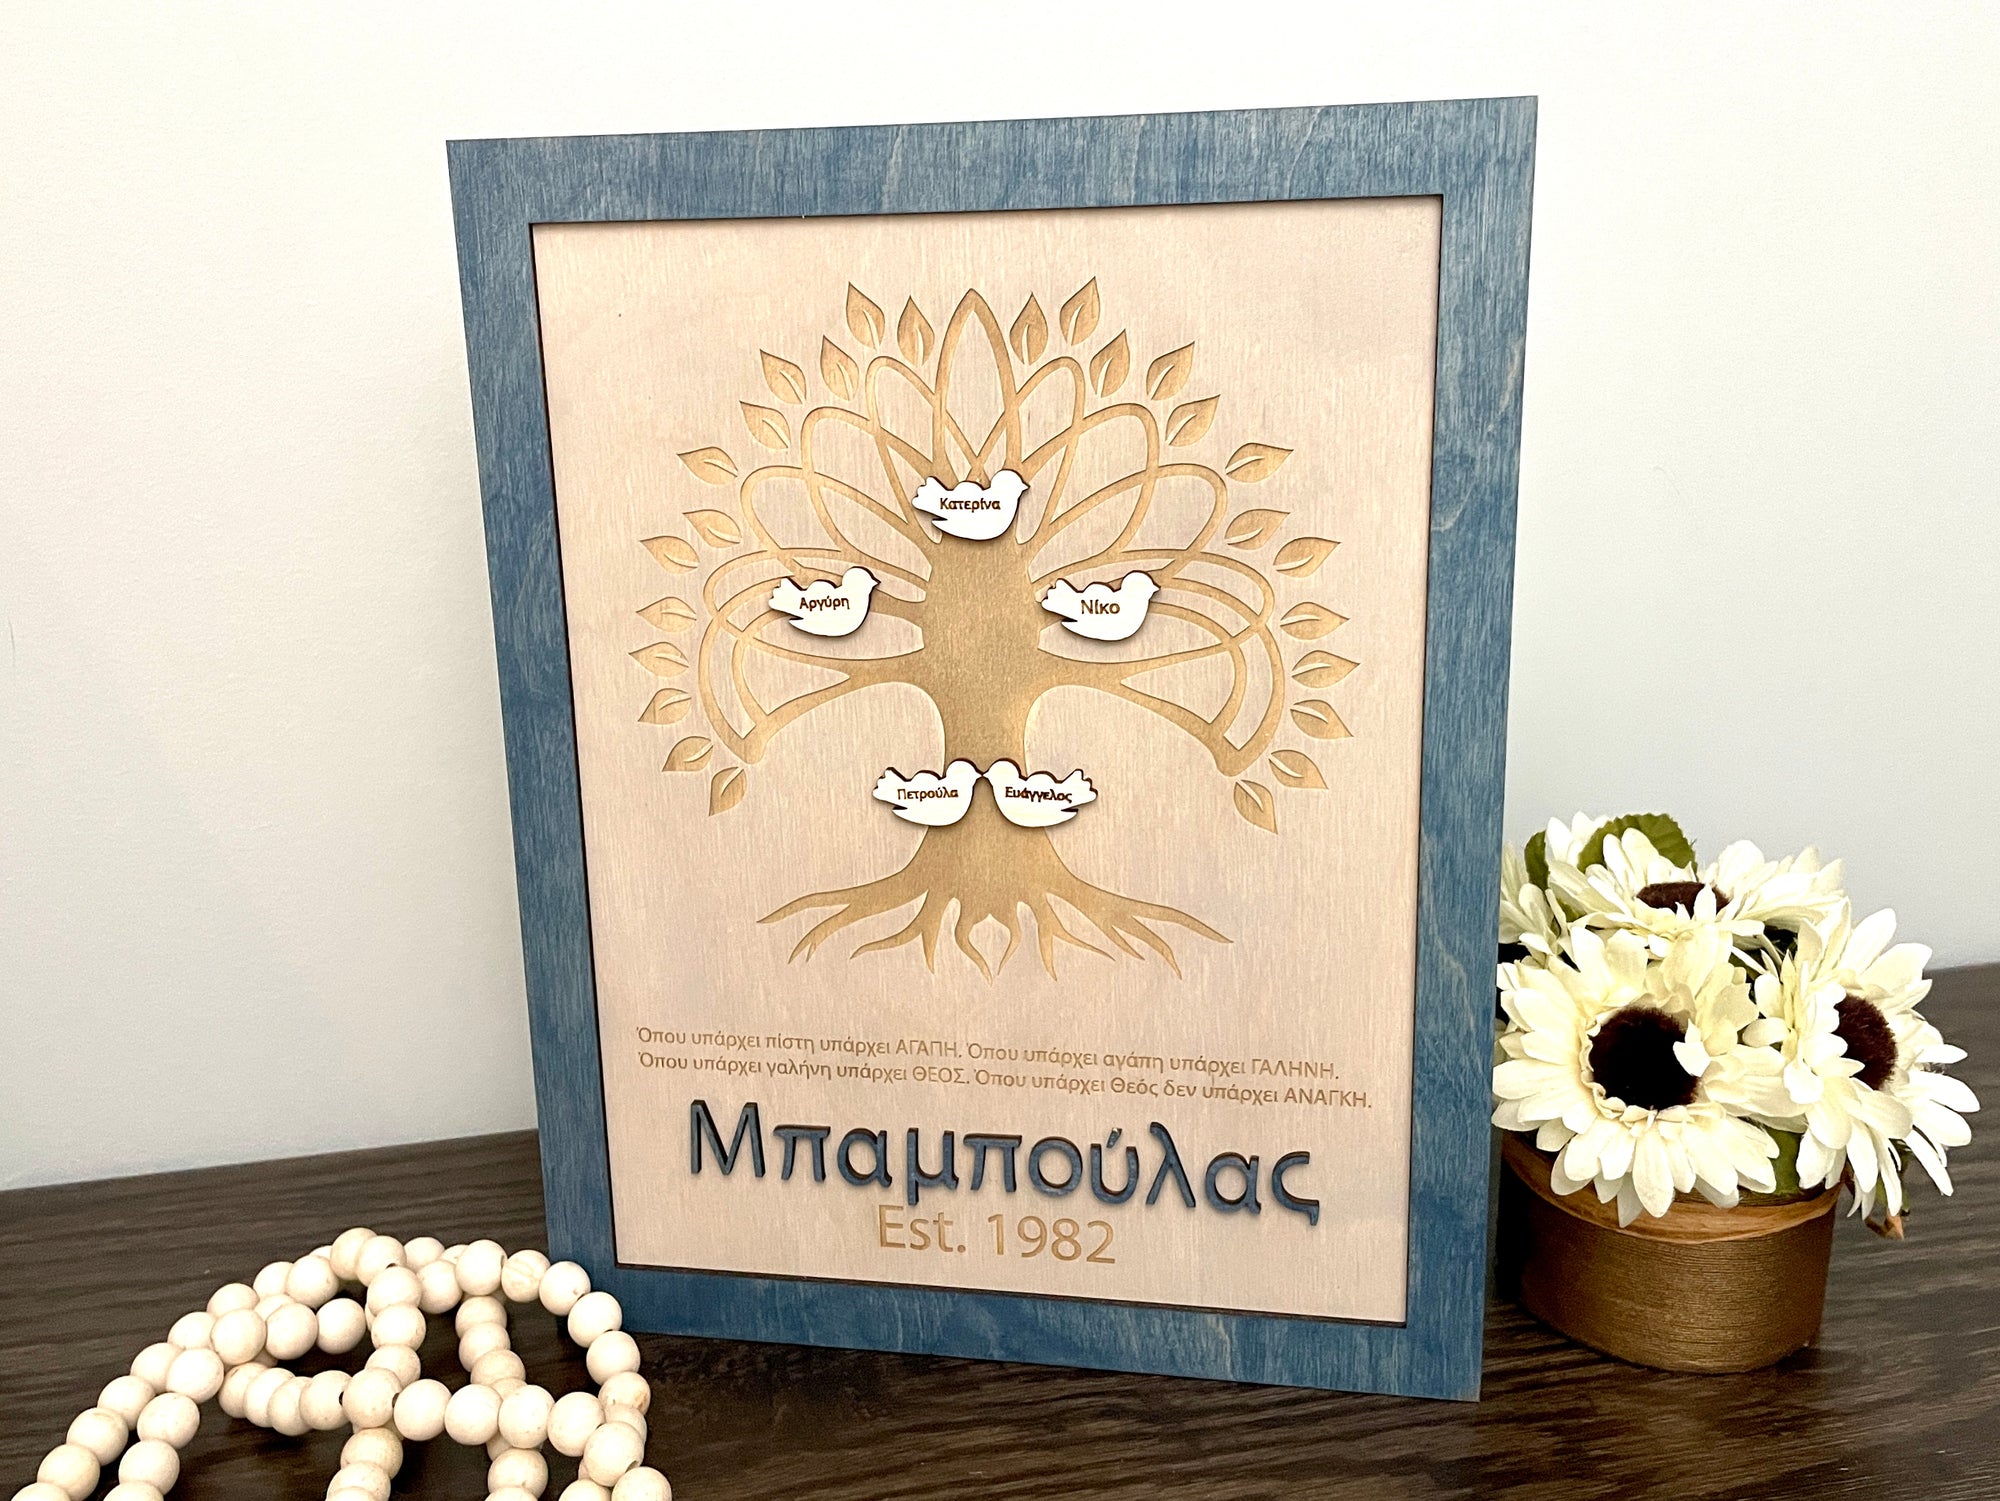 Personalized Wooden Family Tree Sign